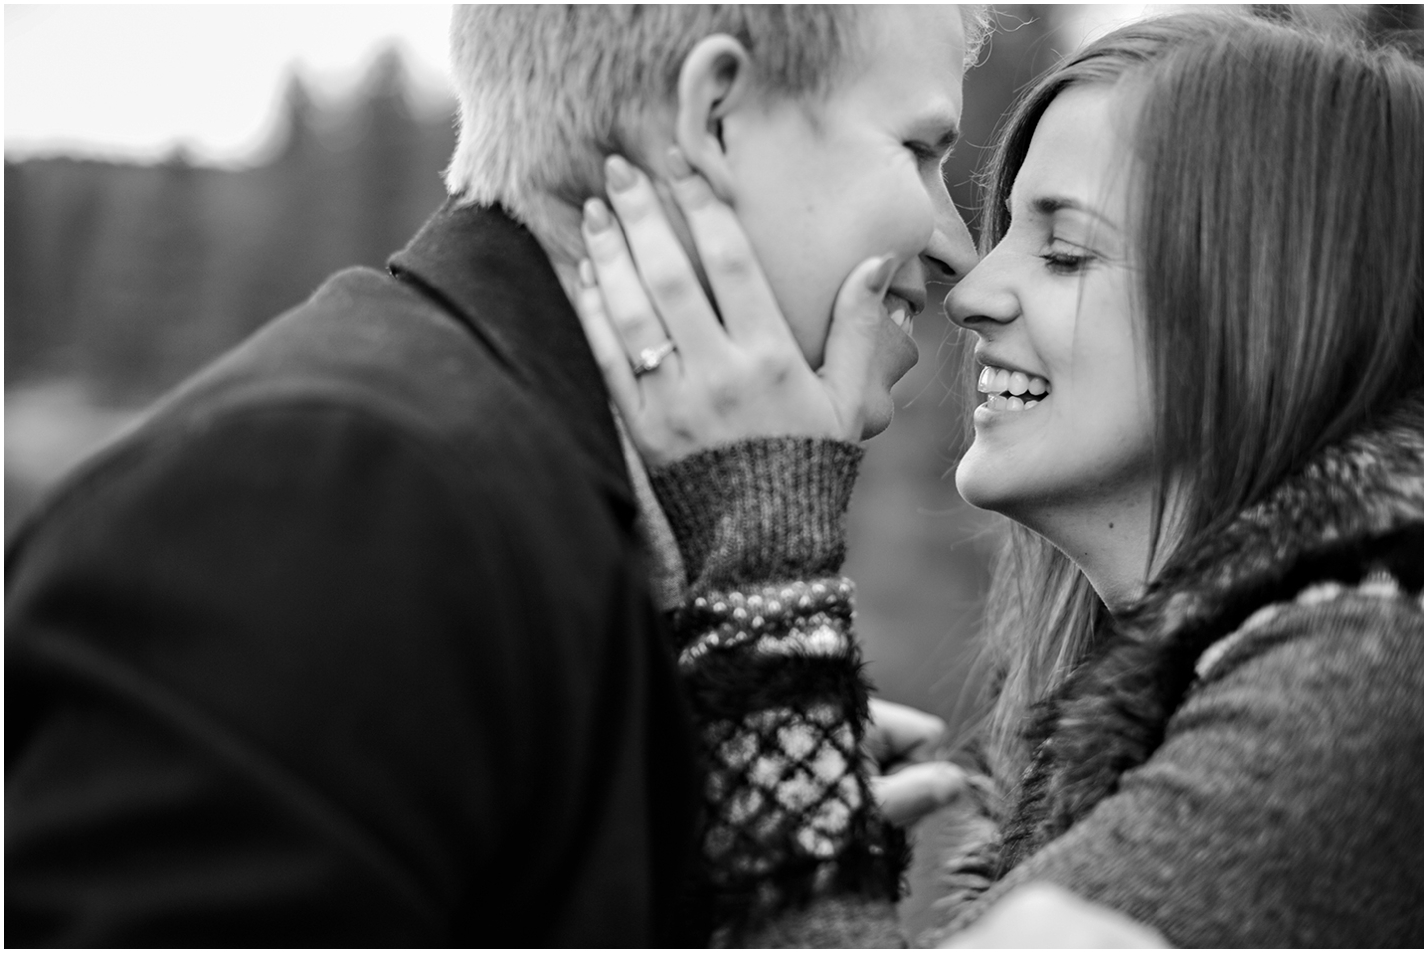 Mountain_engagement_photos_lake_hume-mitchell_and_hannah